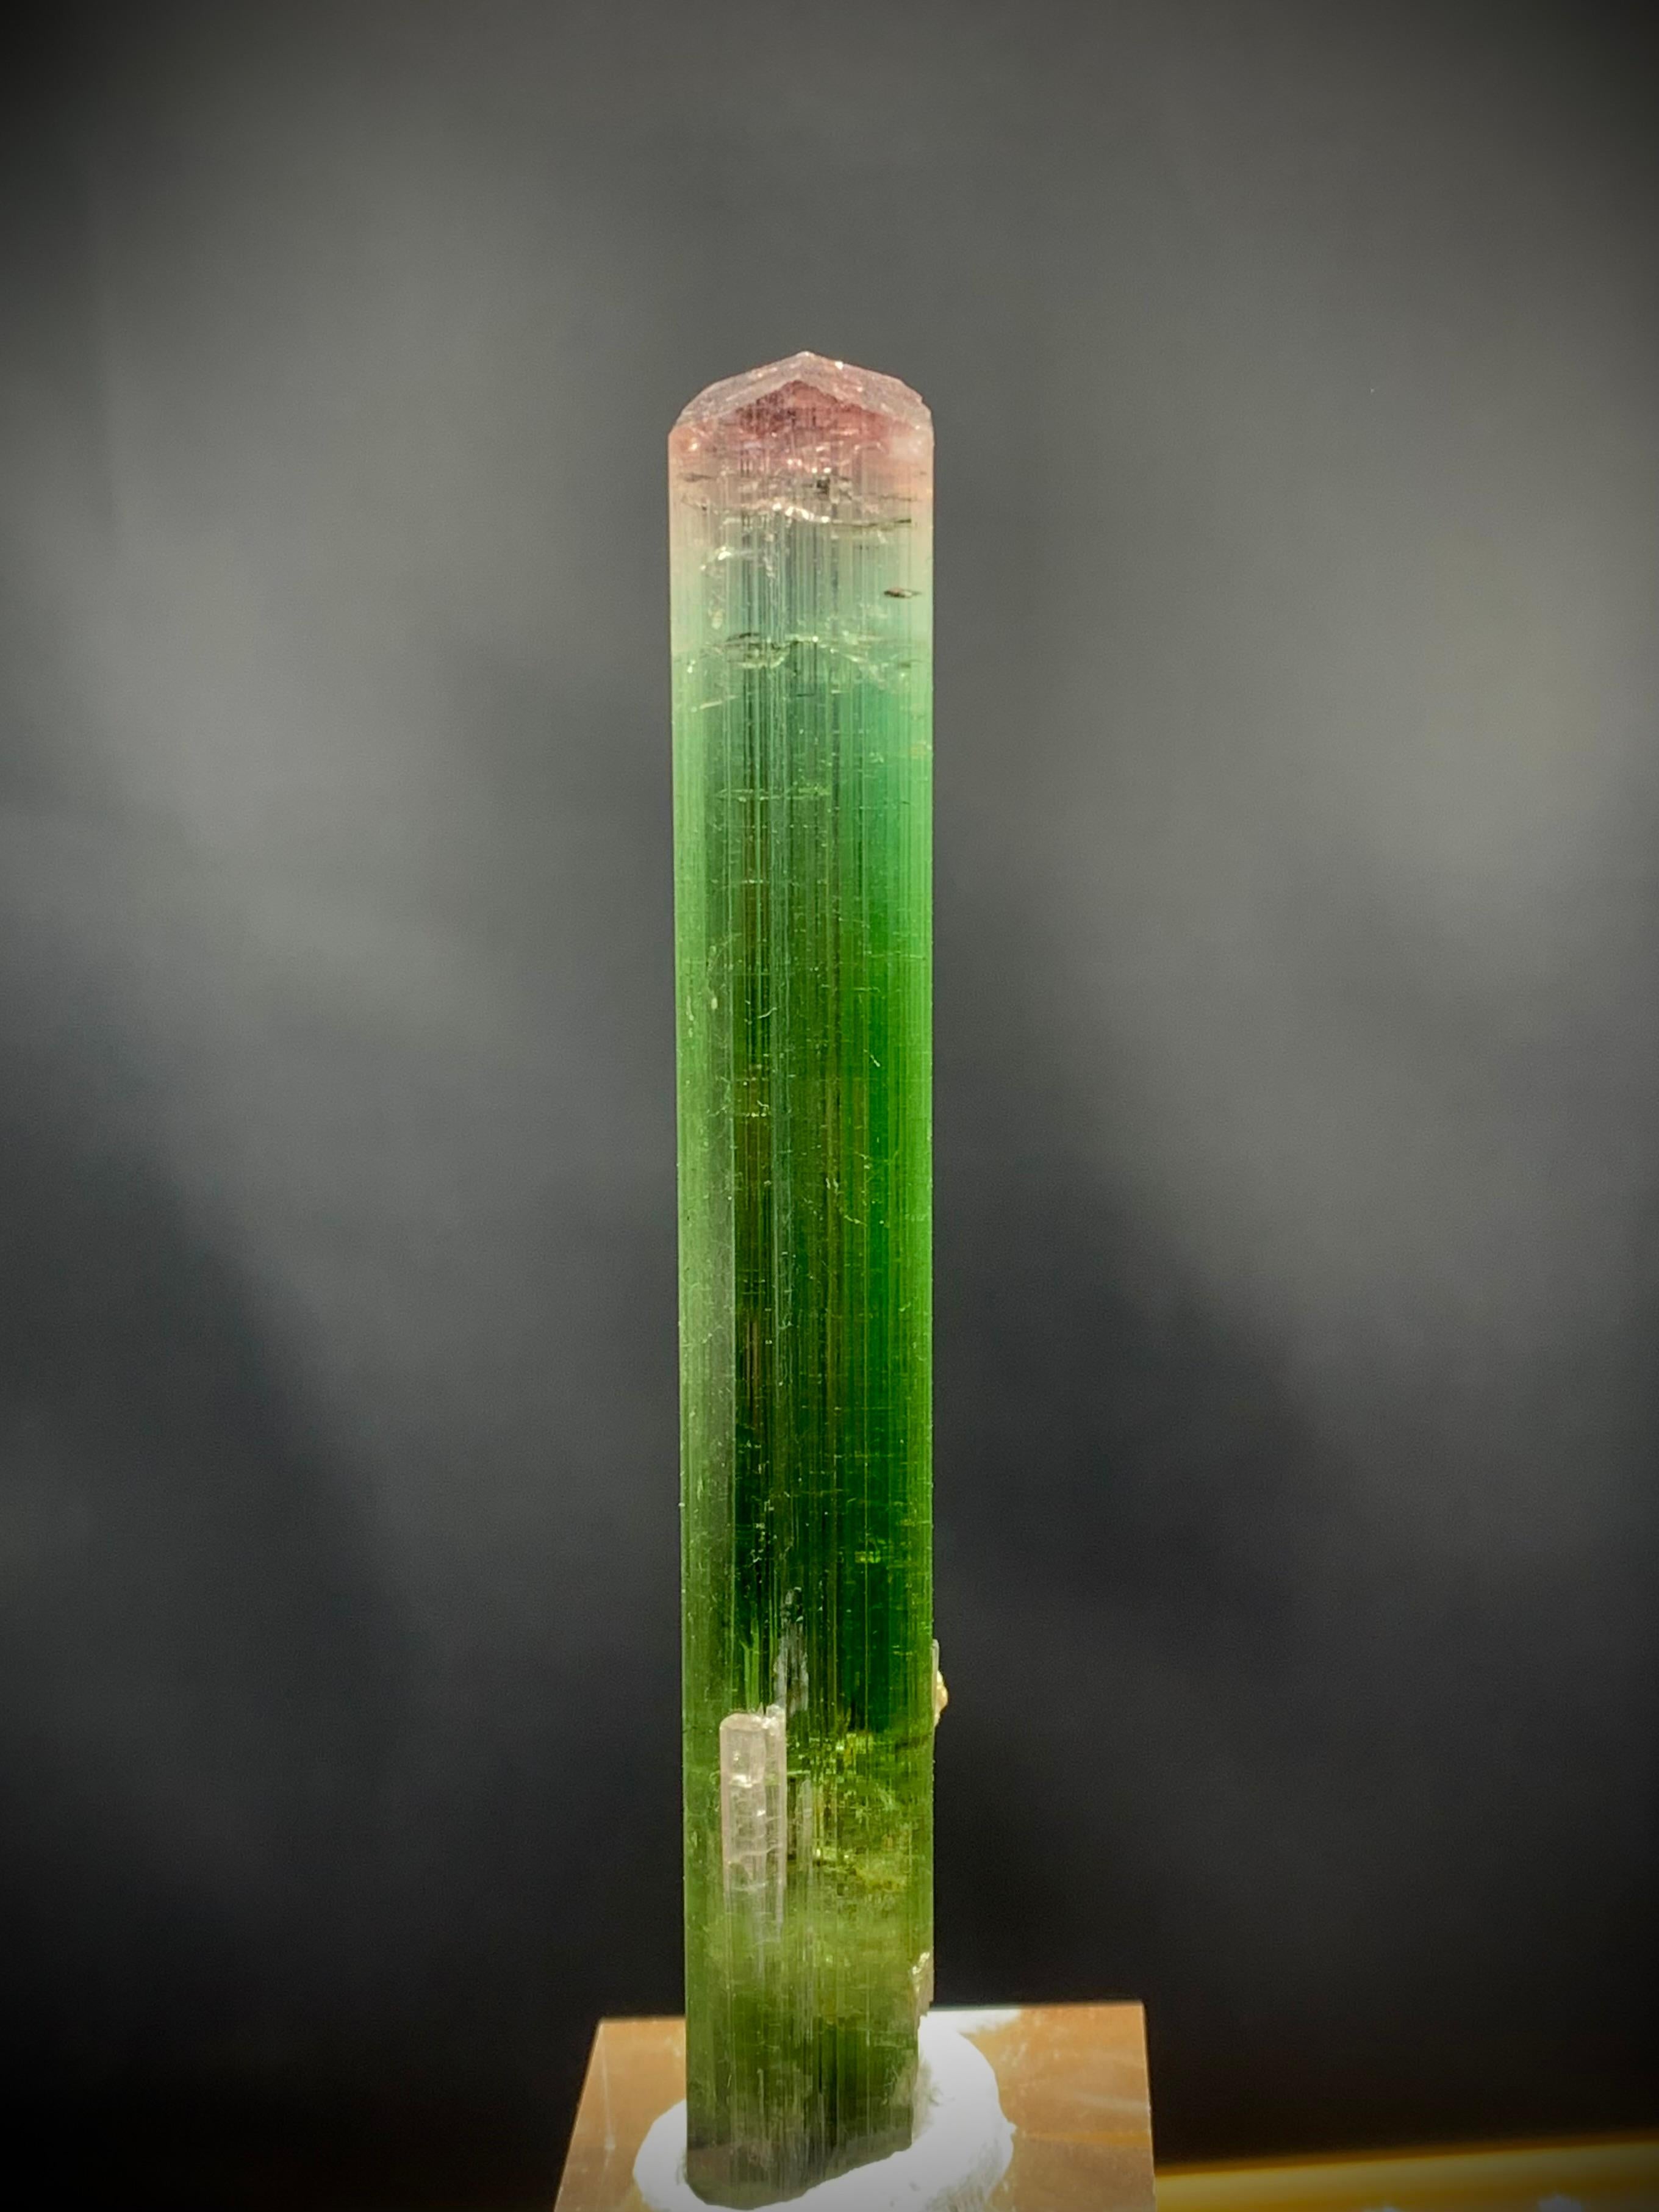 Glamorous Natural Tri Color Tourmaline crystal from Paprok Mine Afghanistan 
Weight: 26.65 grams 
Dimension: 9.0x 1.3x 1.0 Cm
Origin: Paprok mine Afghanistan
Color: Pink, Mint Green and Dark Green 
Shape: Crystal
Quality: AAA
Tourmaline is